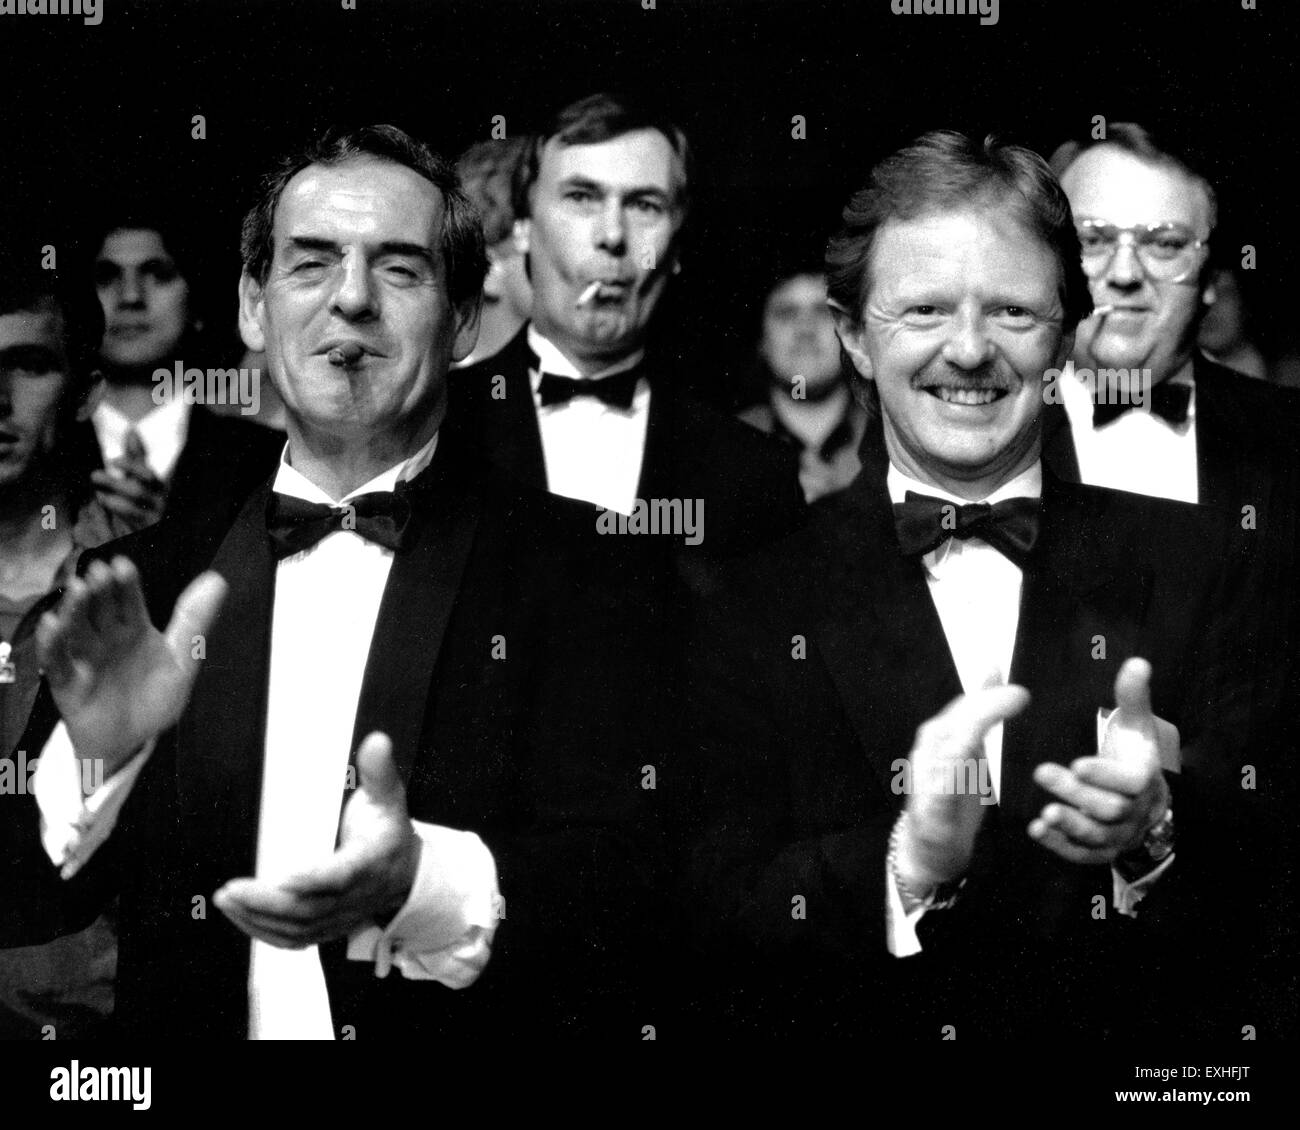 Men at a gentlemens boxing evening wearing black tuxedo and smoking cigars and cigarettes 1990s Stock Photo